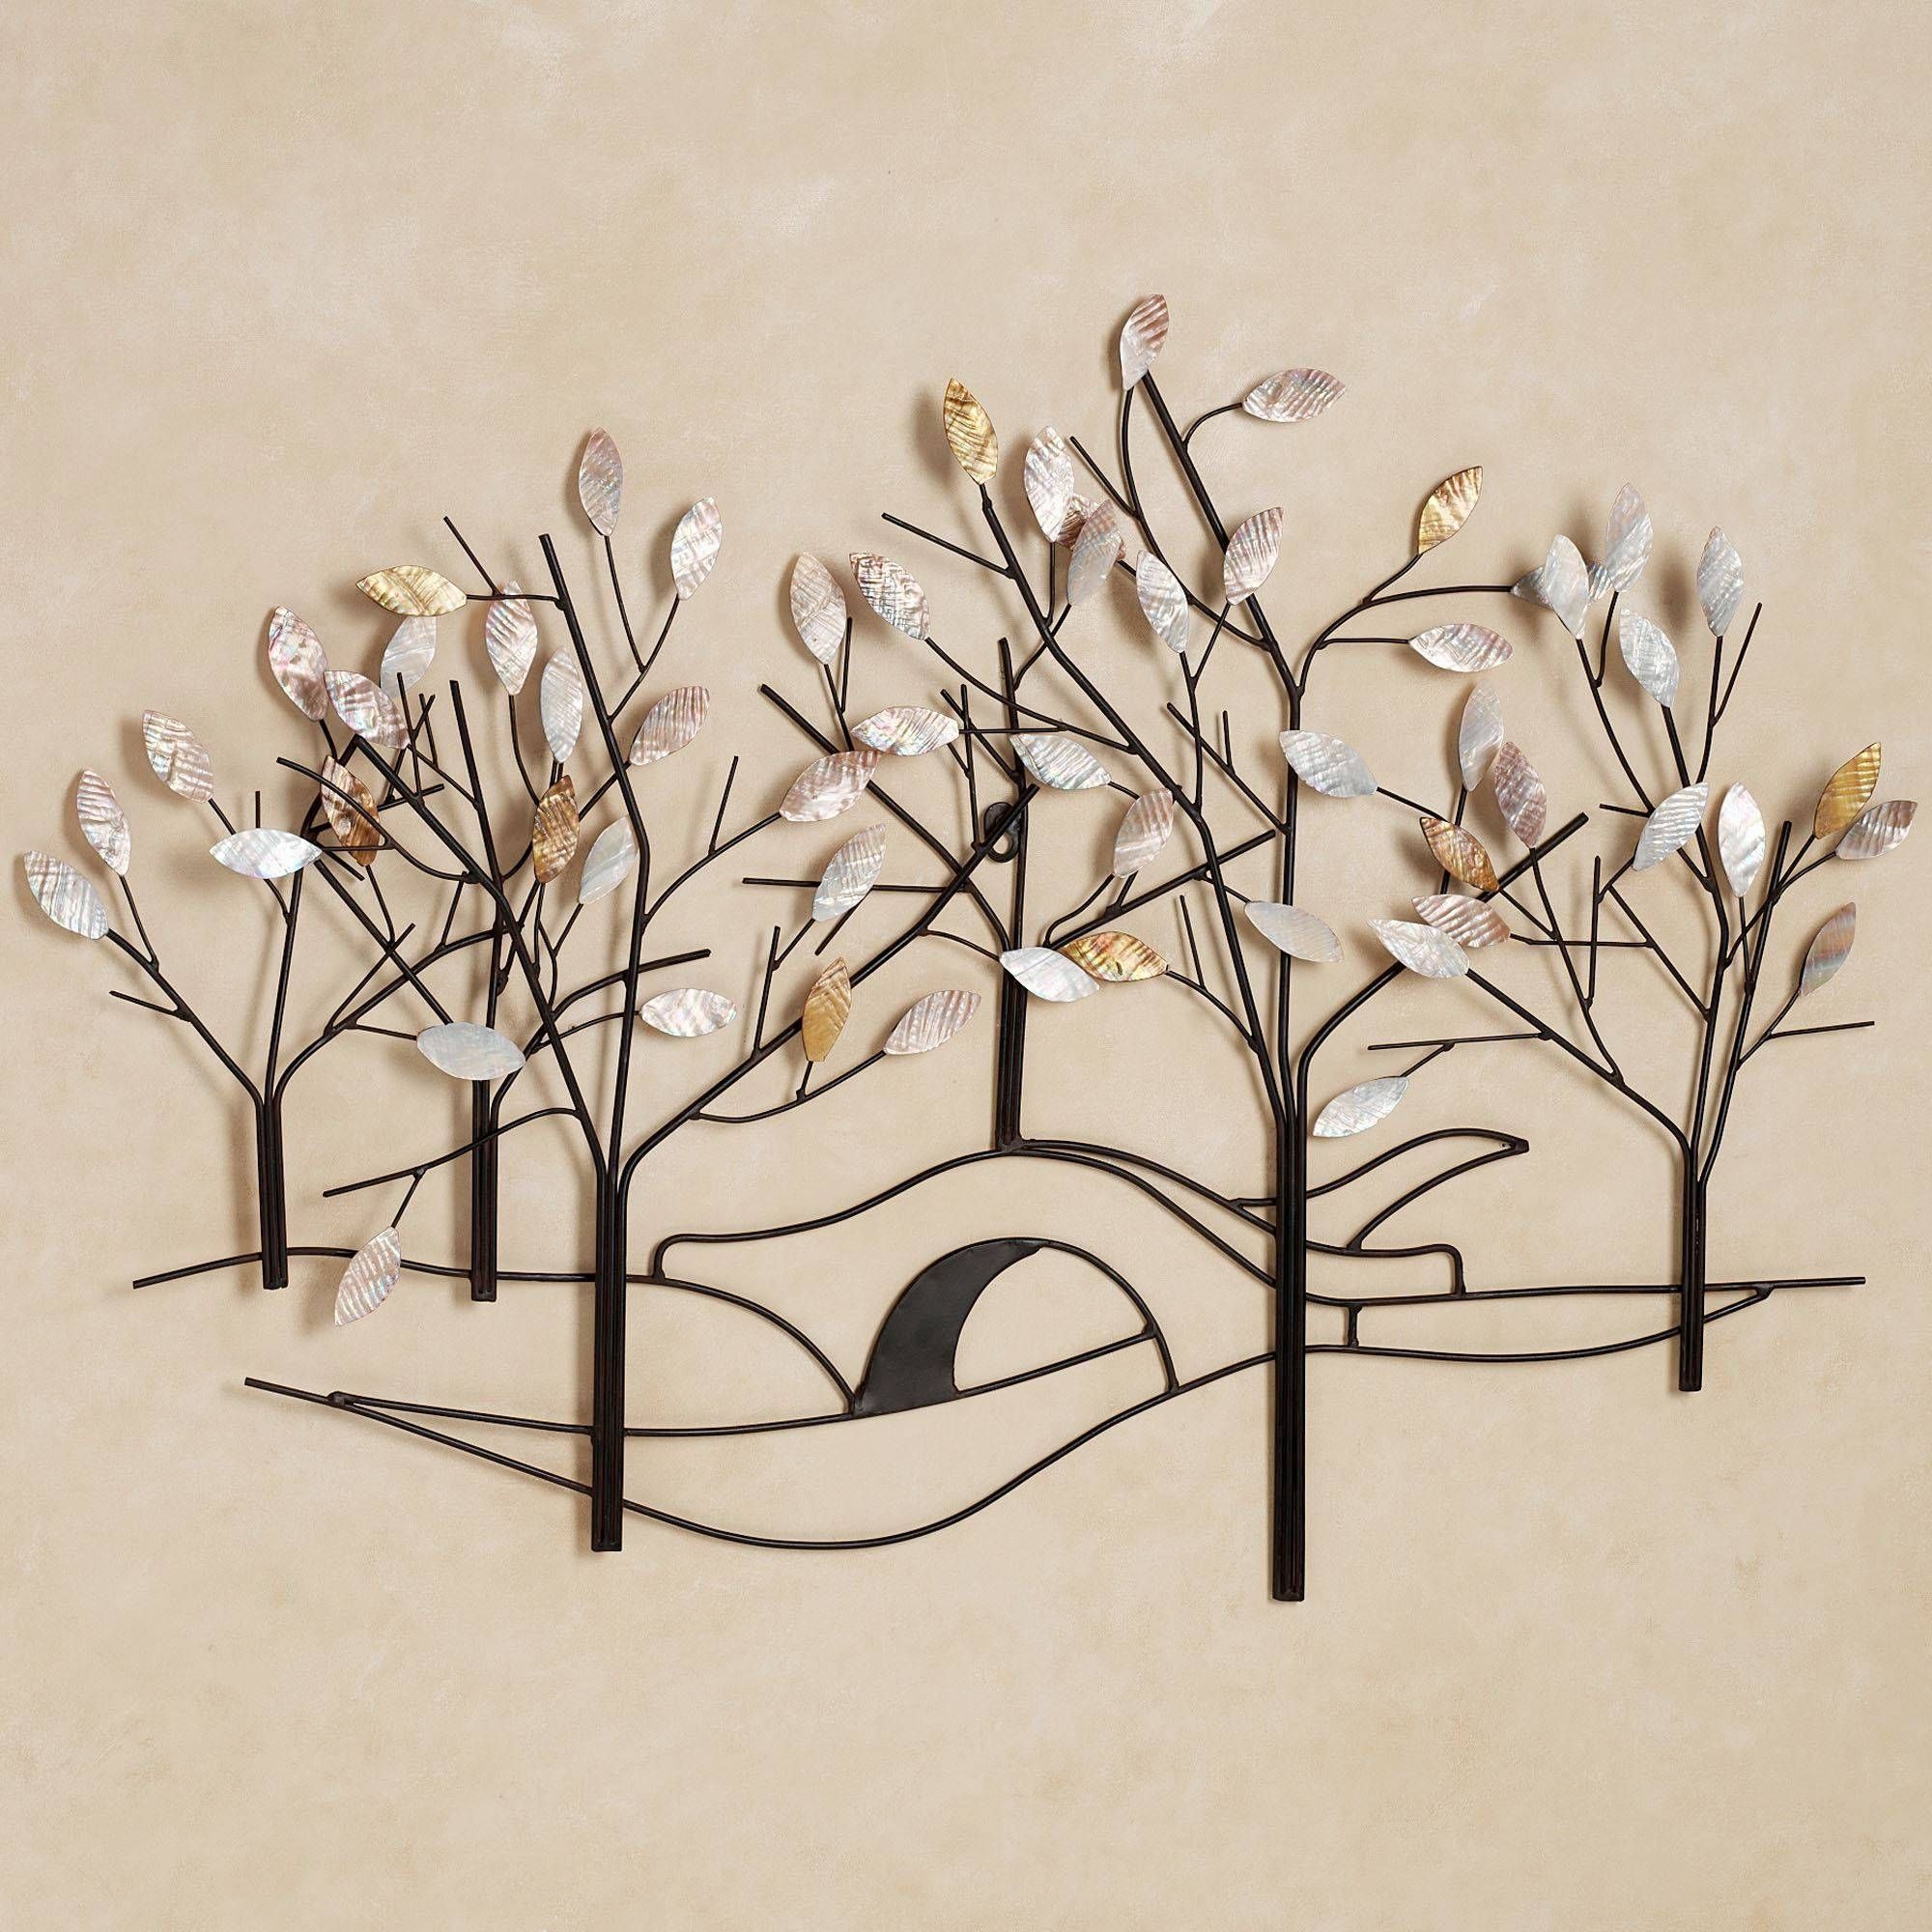 Majestic Solitude Wall Art Within Most Up To Date Bronze Metal Wall Art (View 10 of 20)